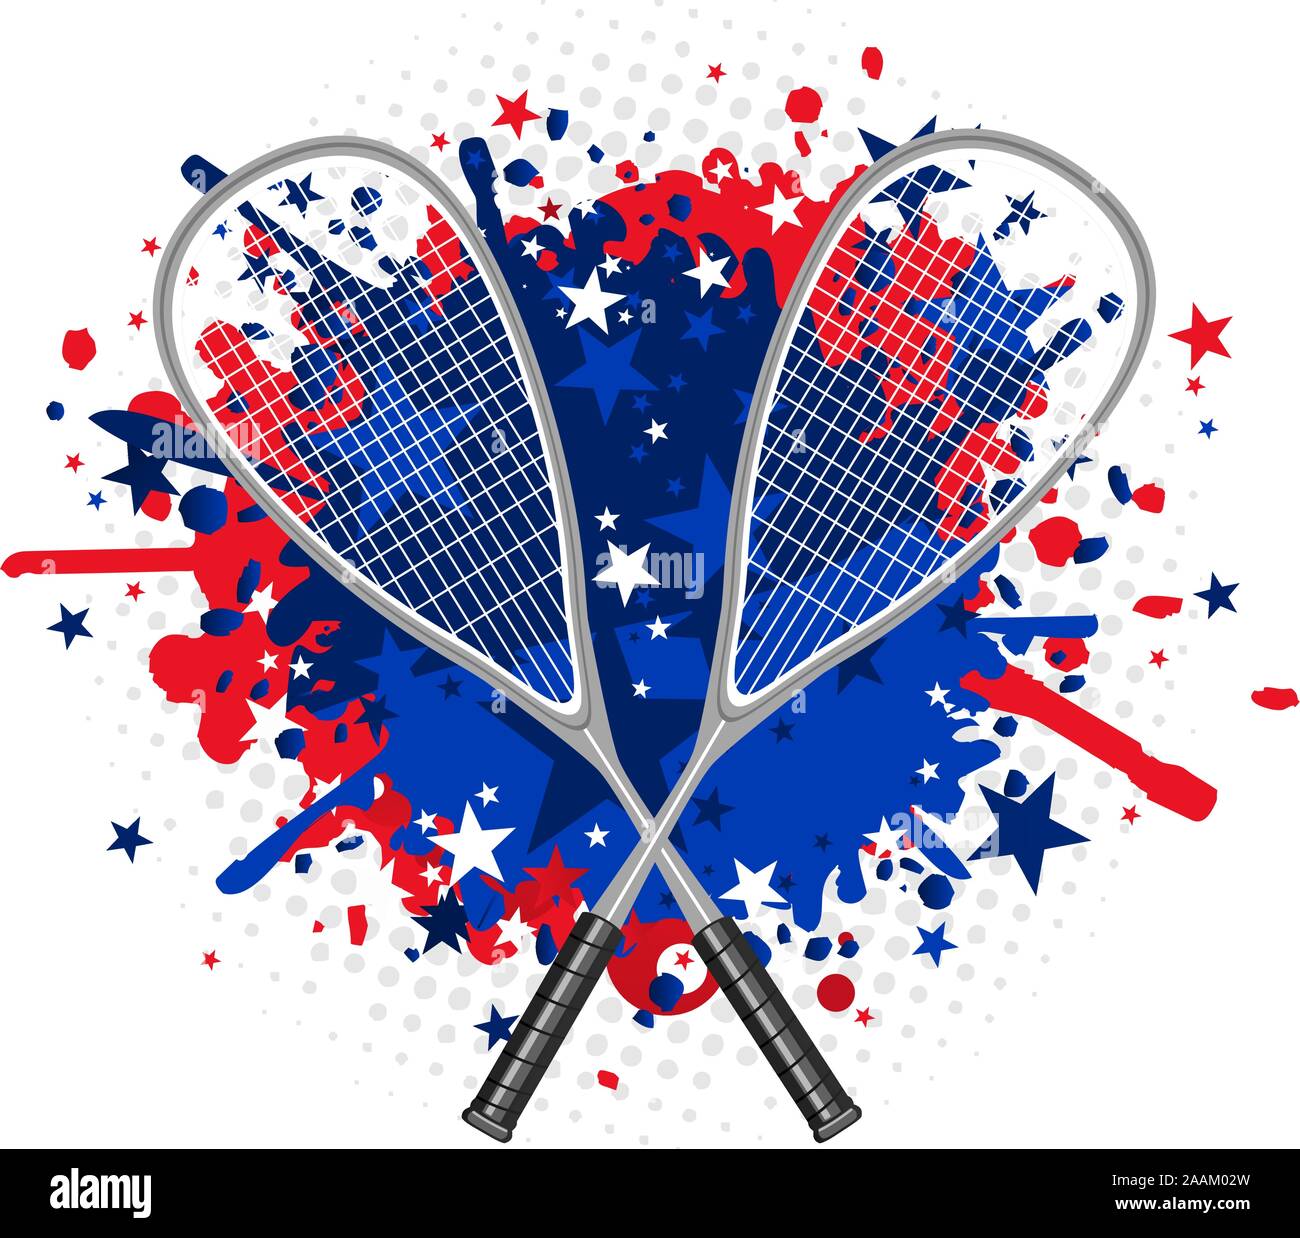 Squash Rackets with red and blue splash vector illustration. Stock Vector